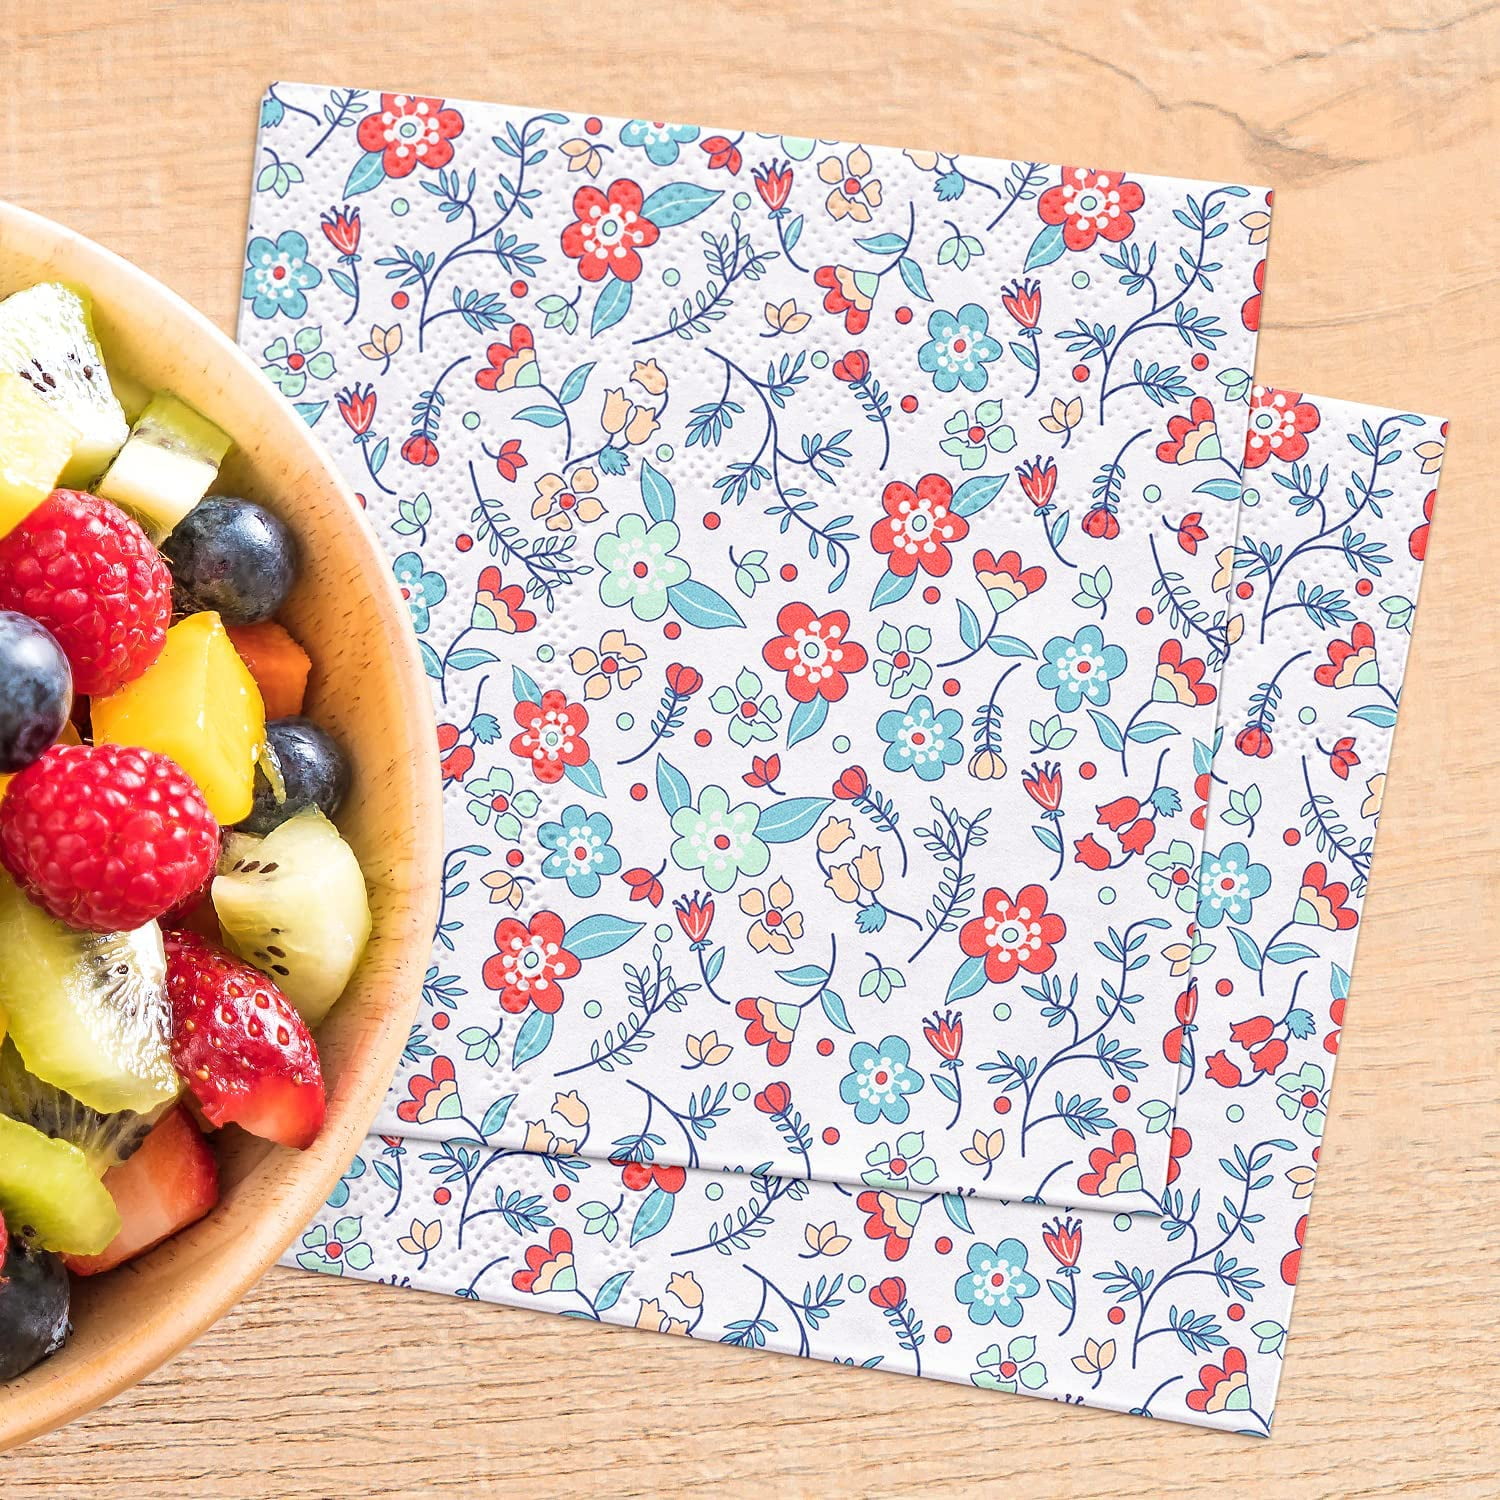 Baby Showers Birthdays Fun & Festive Floral Patterns Bursting with Vibrant Colors Holiday Events Liberty Flower Print Cocktail Napkins Set Decorative & Disposable Paper Napkins for Weddings 